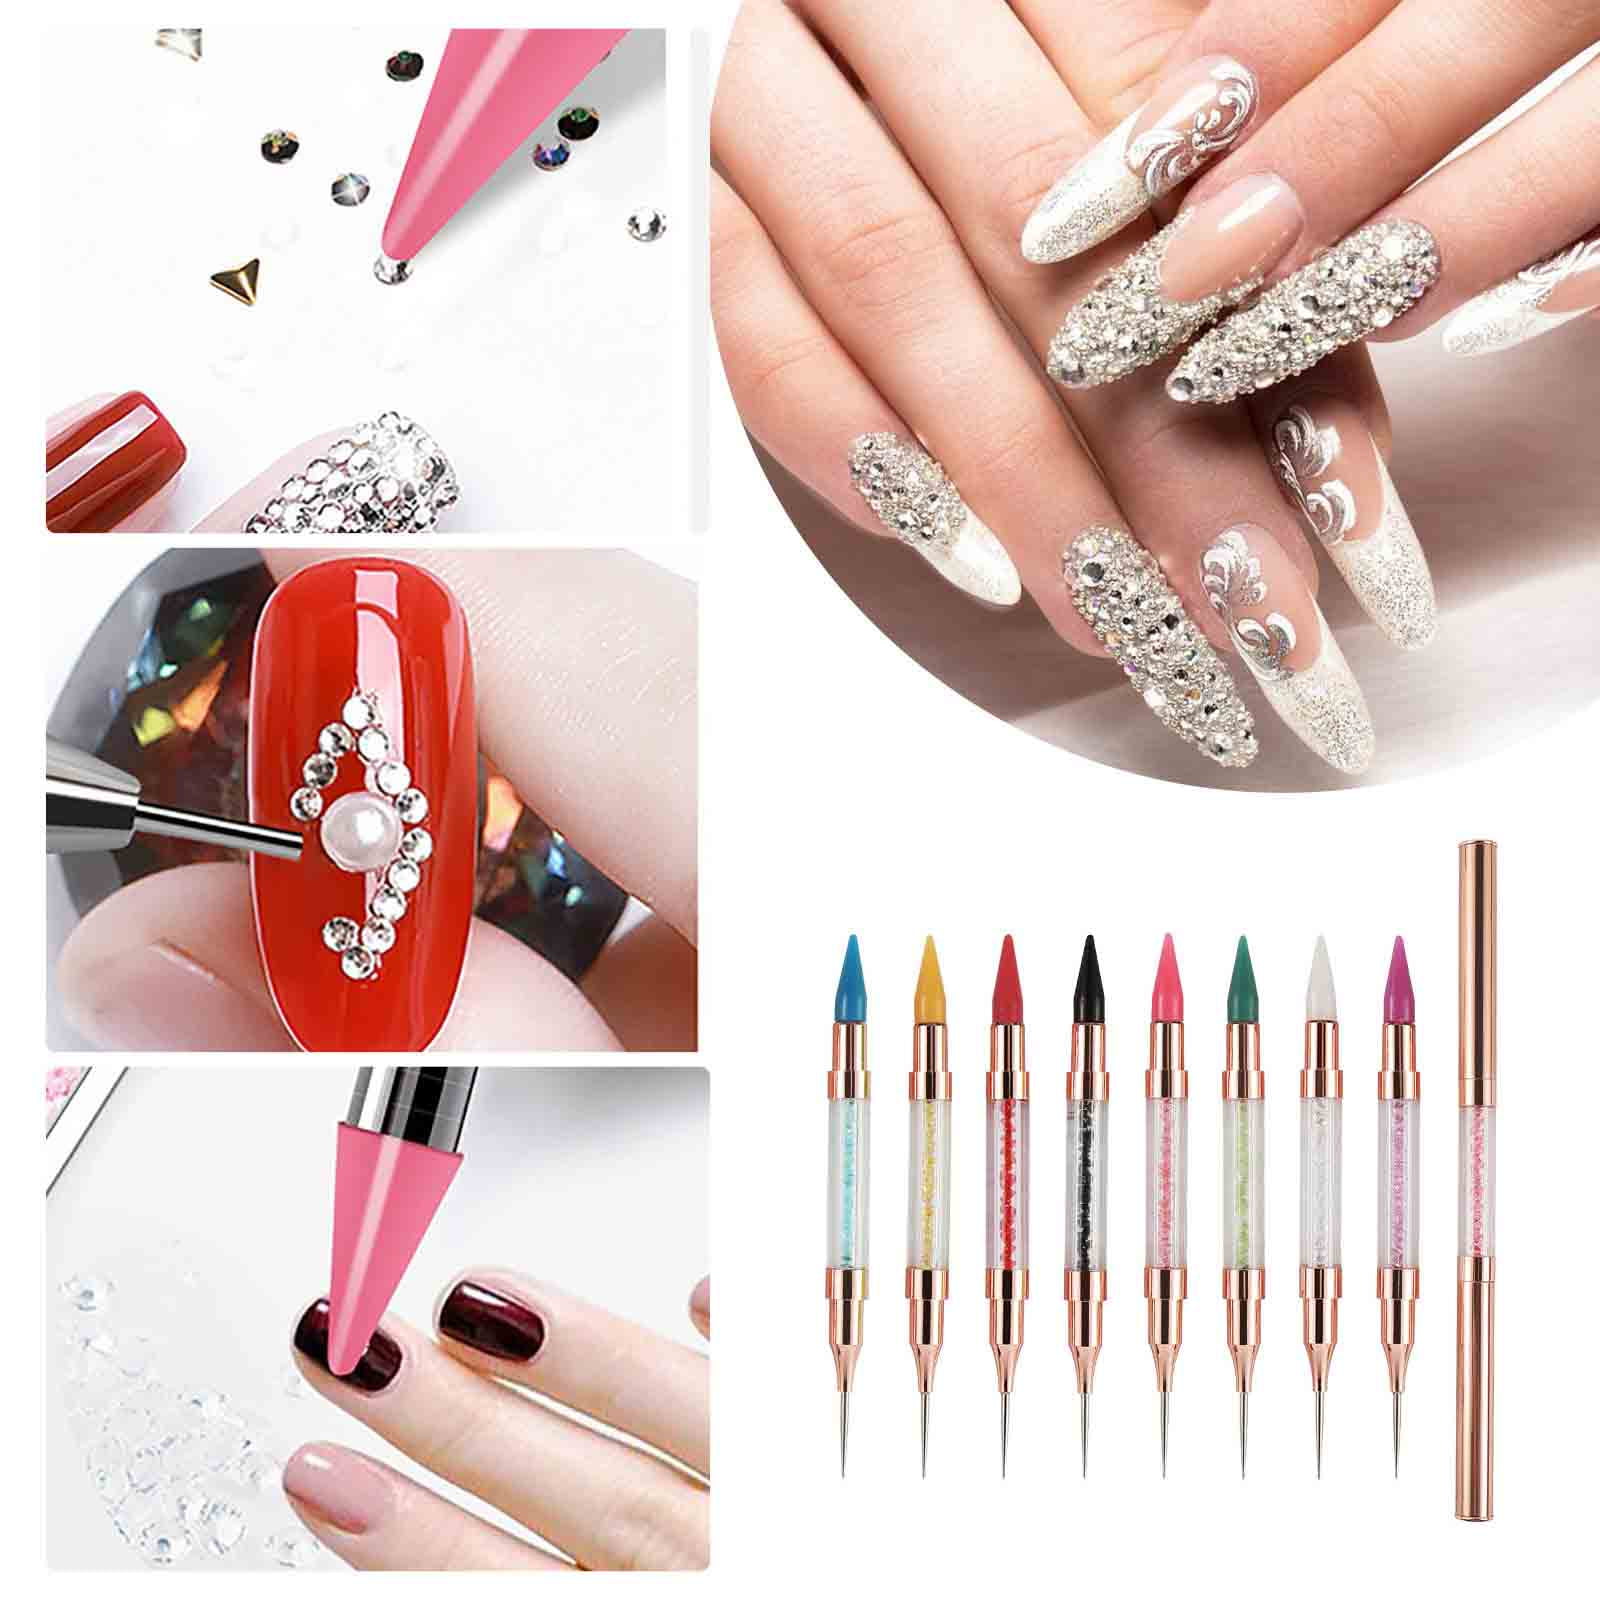 5Pcs/Set Nail Art Dotting Pen Tool for Nails Designs Dual-ended Drawing  Painting Rhinestones Manicure Tools - AliExpress